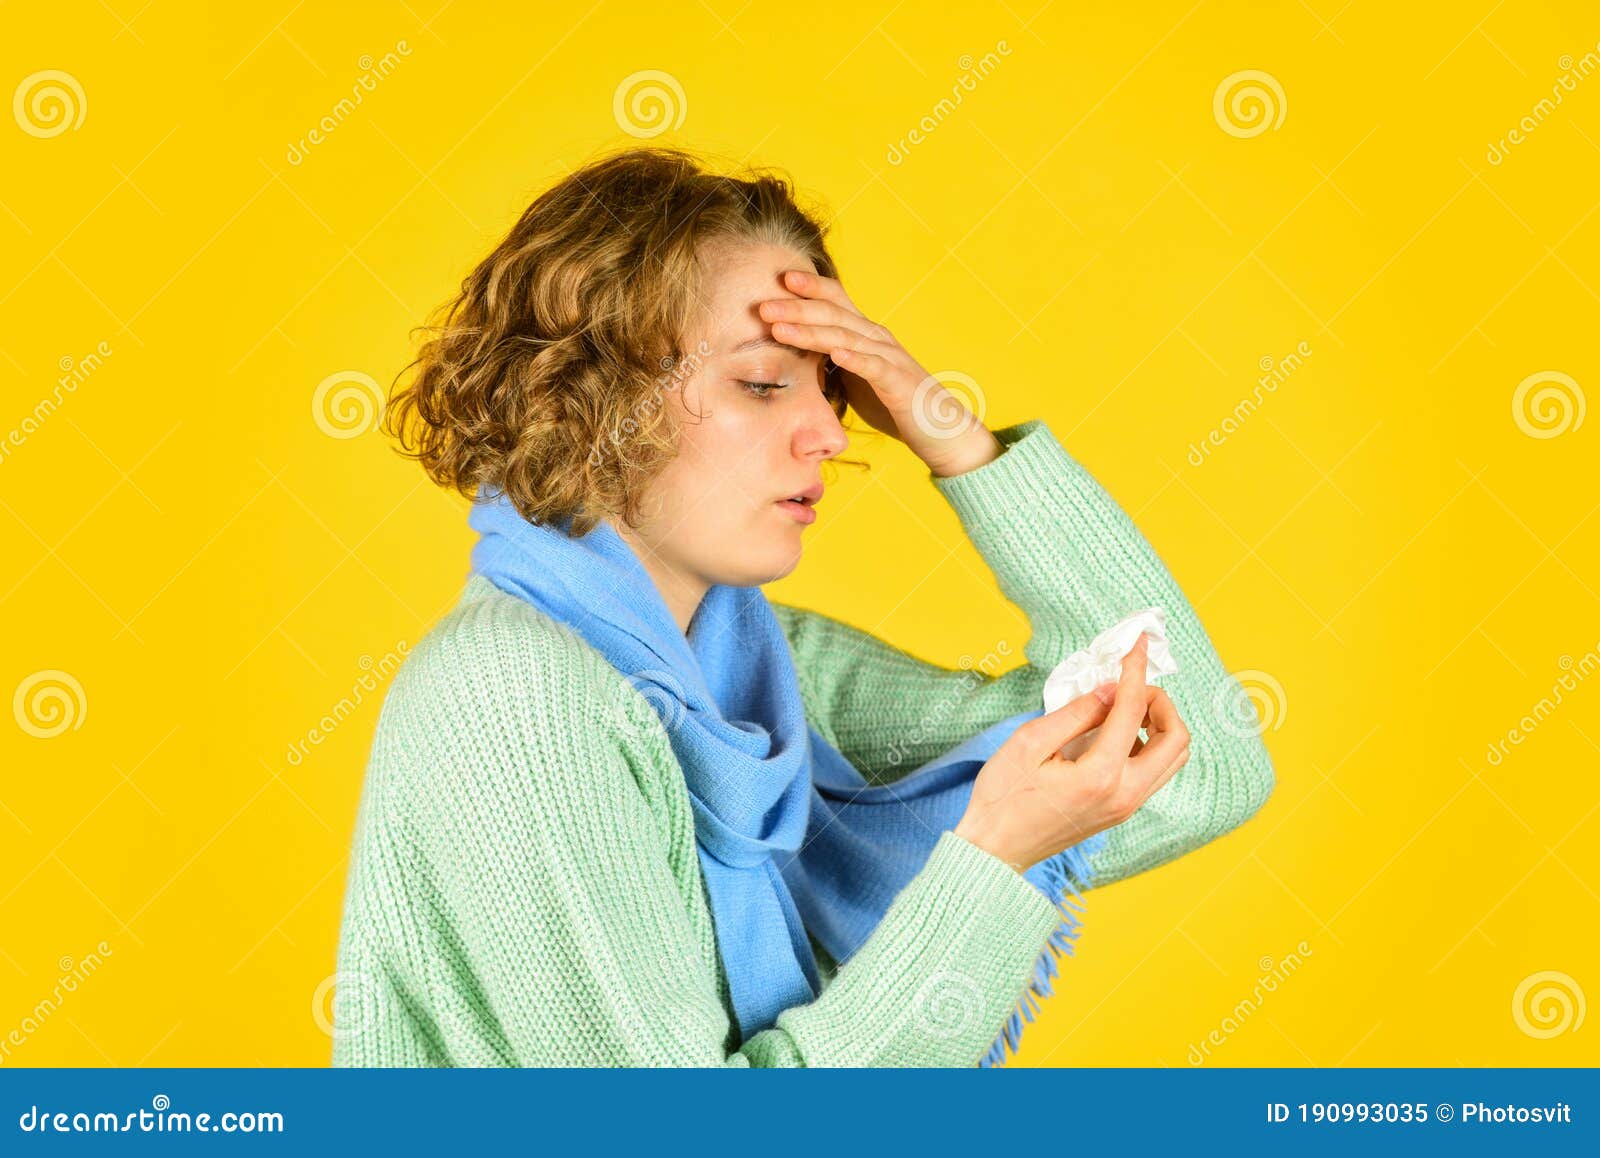 Chronic Sinusitis Cold Flu Symptoms Sick Woman Blowing Nose Contagious Respiratory Disease Influenza Infection Stock Image Image Of Outbreak Nose